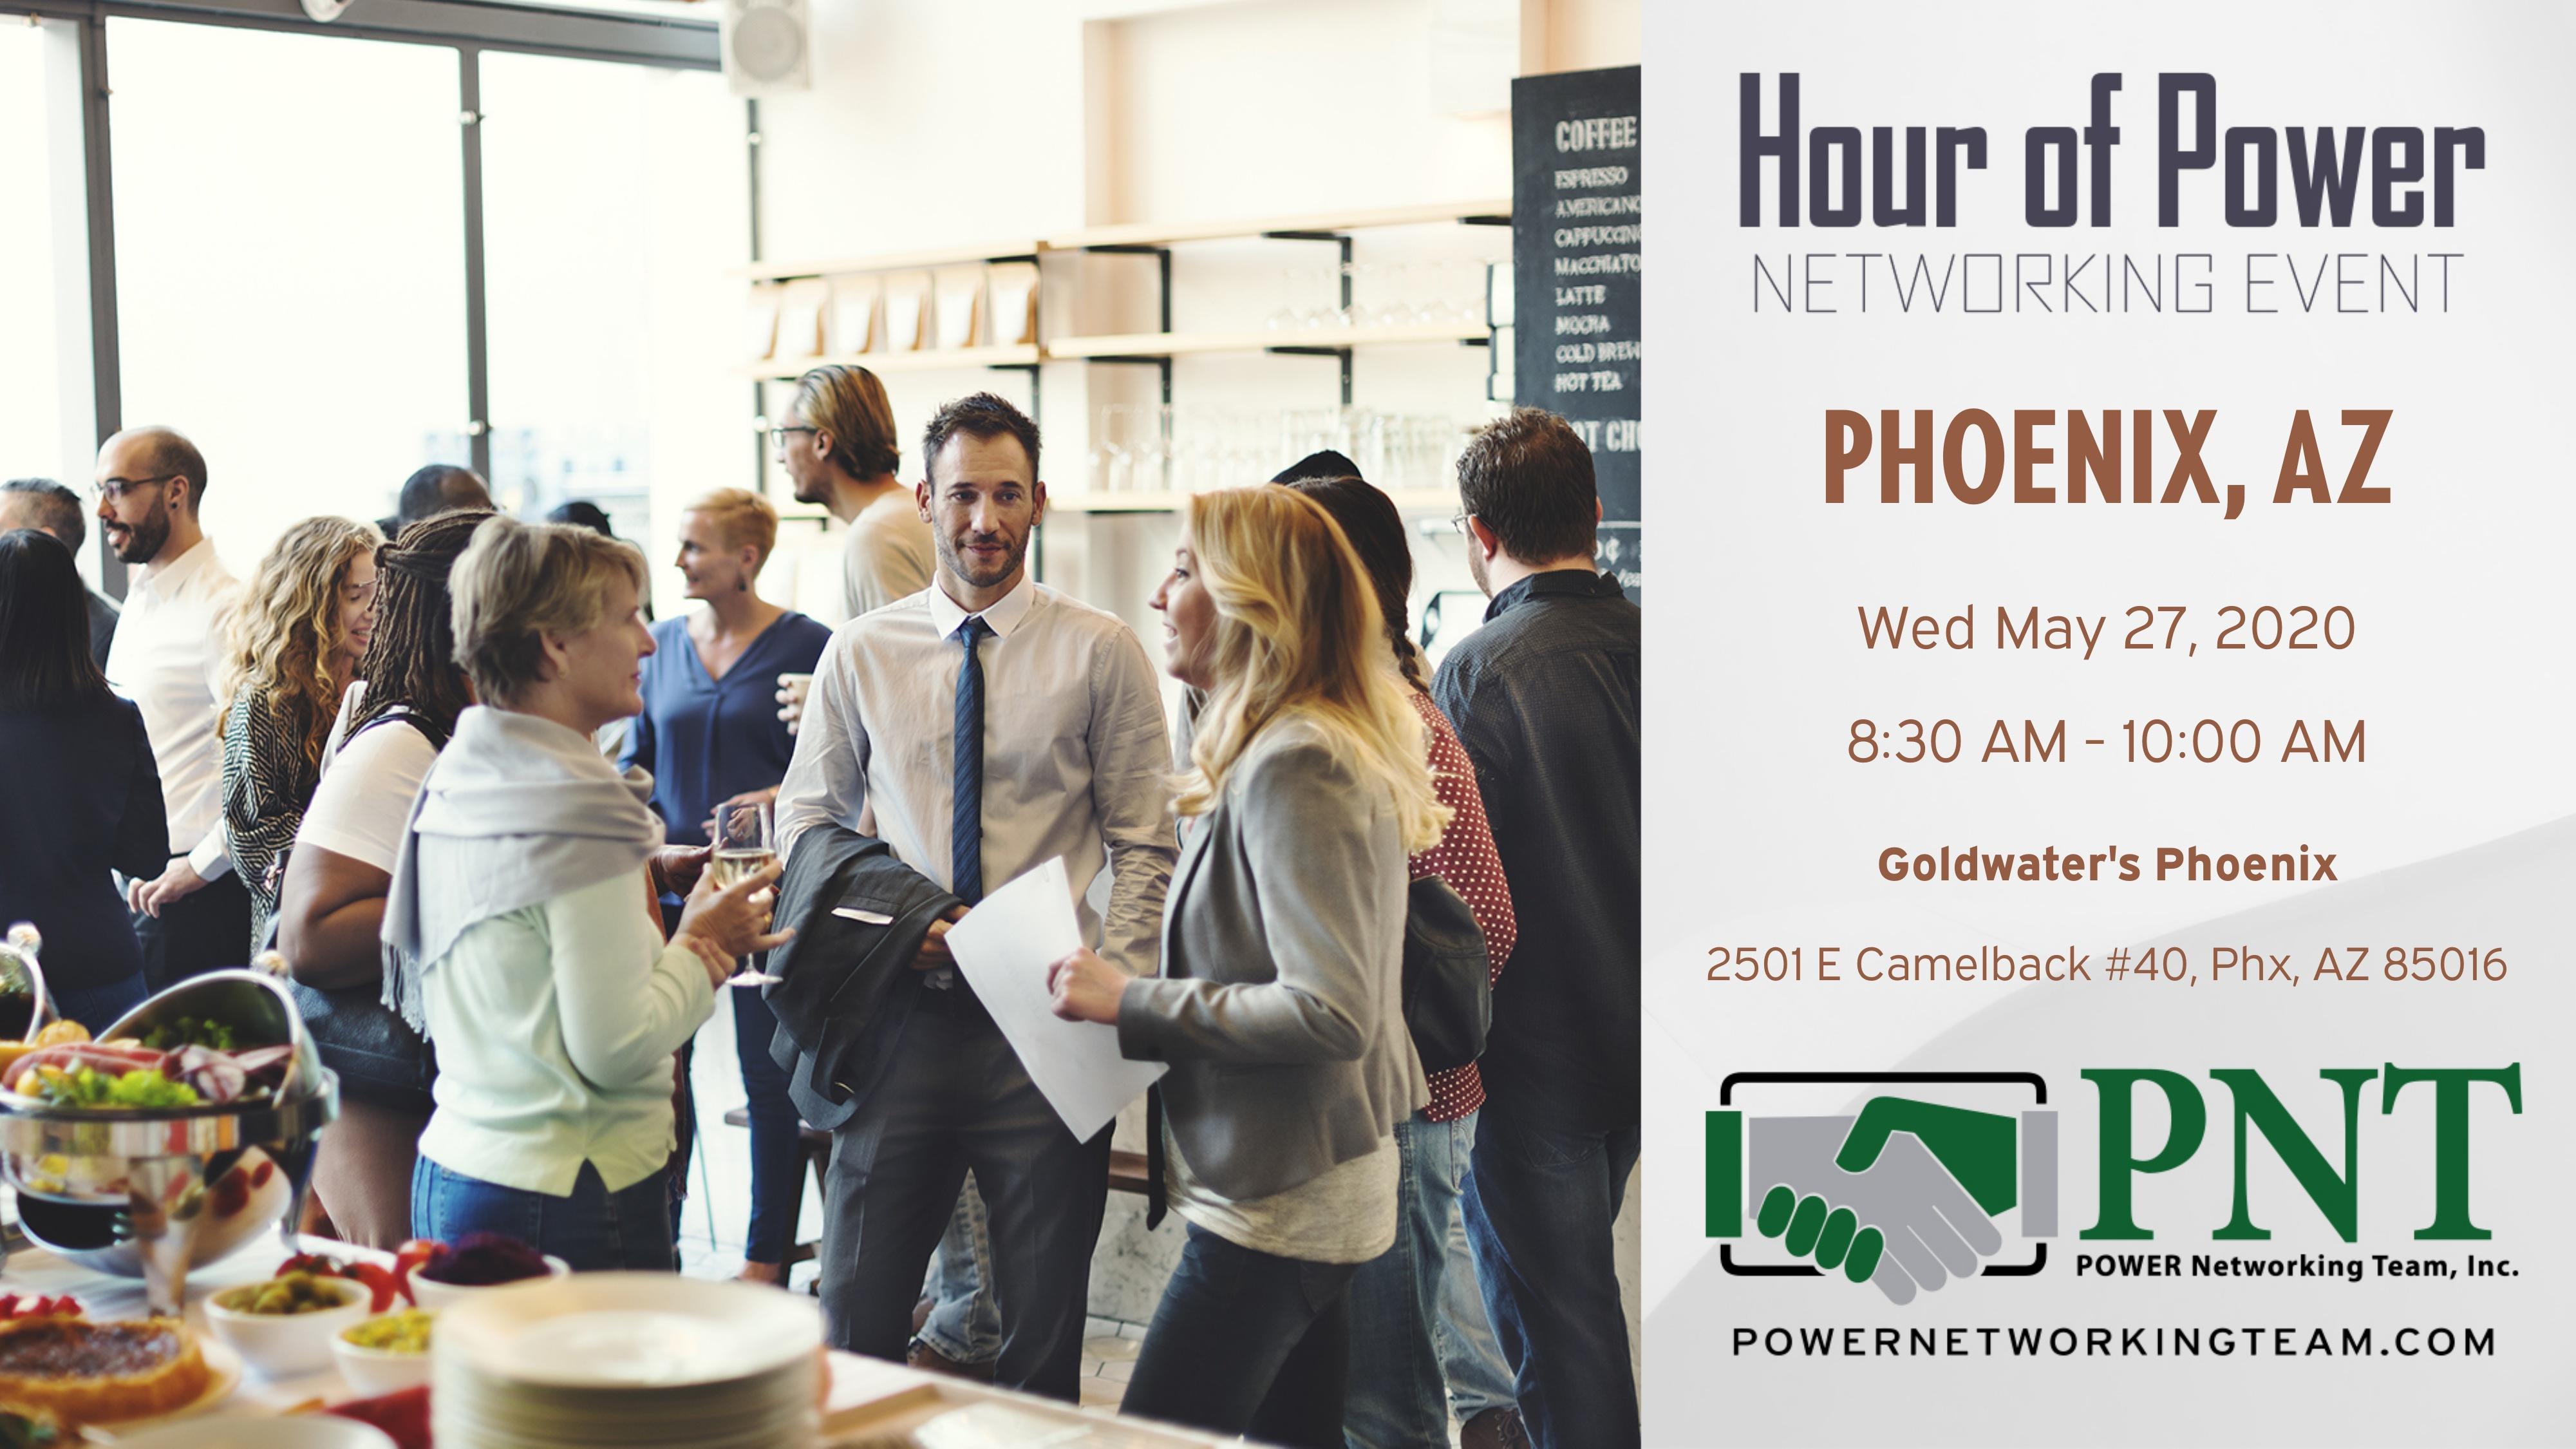 05/27/20 - PNT Phoenix-Biltmore - Hour of Power Networking Event